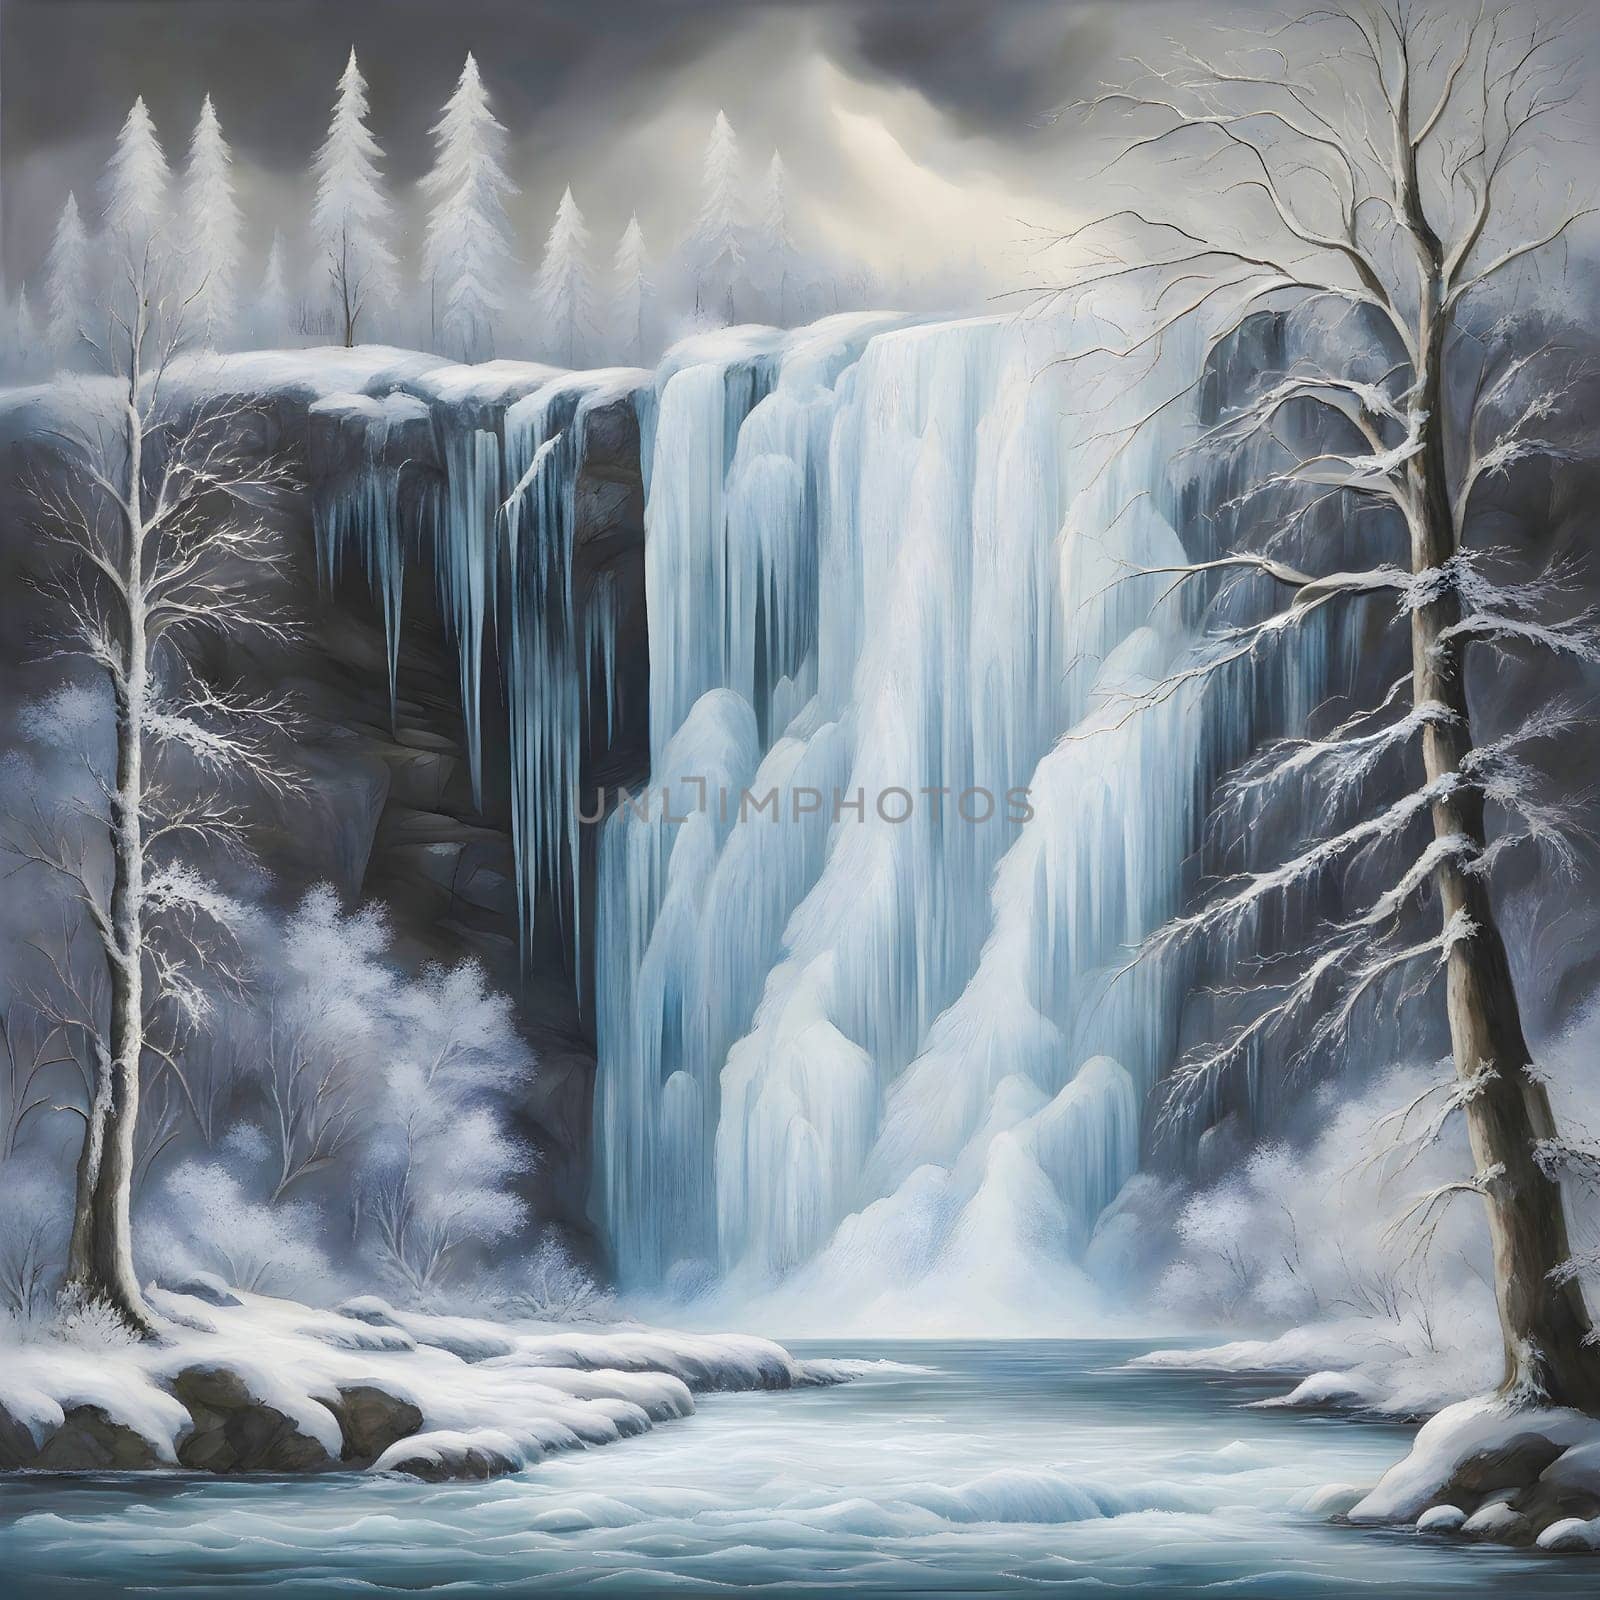 This beautiful illustration shows an icy waterfall in winter. The waterfall is tall and narrow, and its streams of water are icy and sharp. Ice crystals are reflected in the rays of the sun that penetrate through the clouds. Generated AI